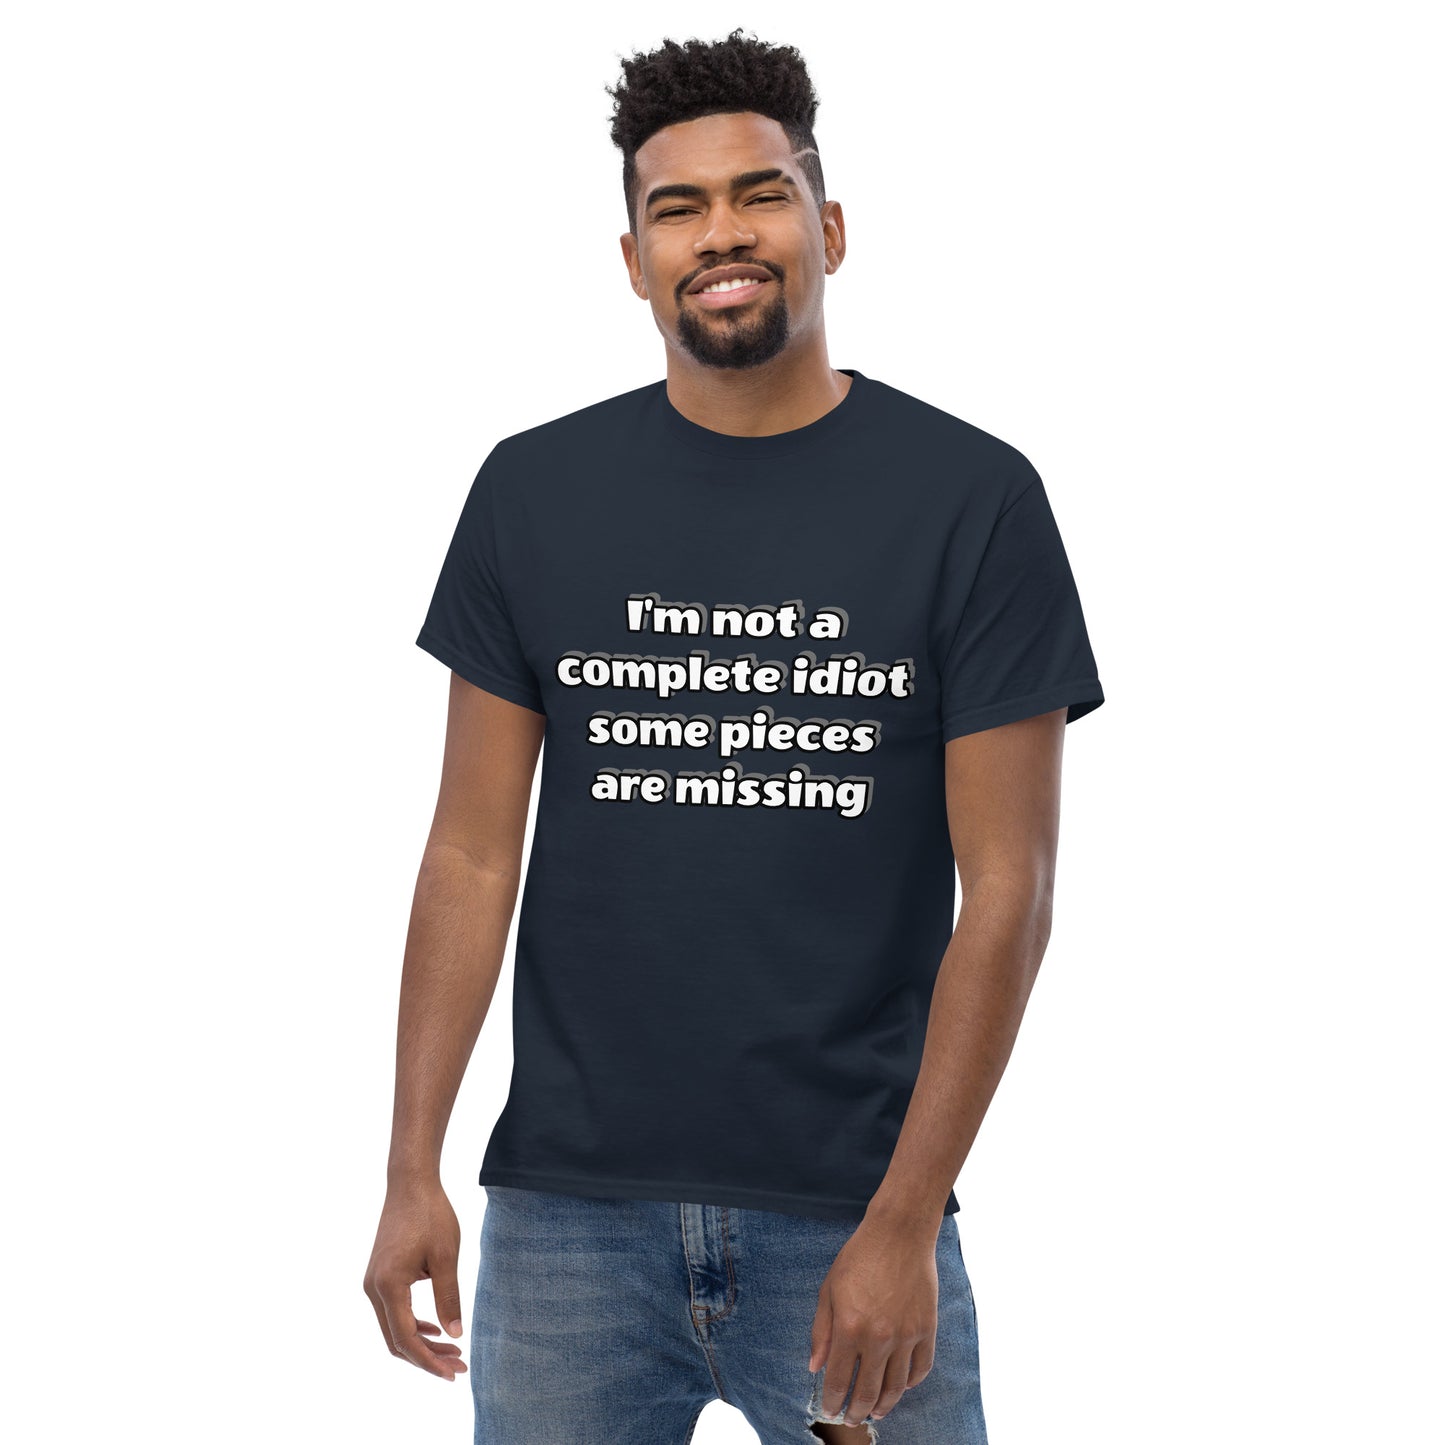 Men with navy blue t-shirt with text “I’m not a complete idiot, some pieces are missing”